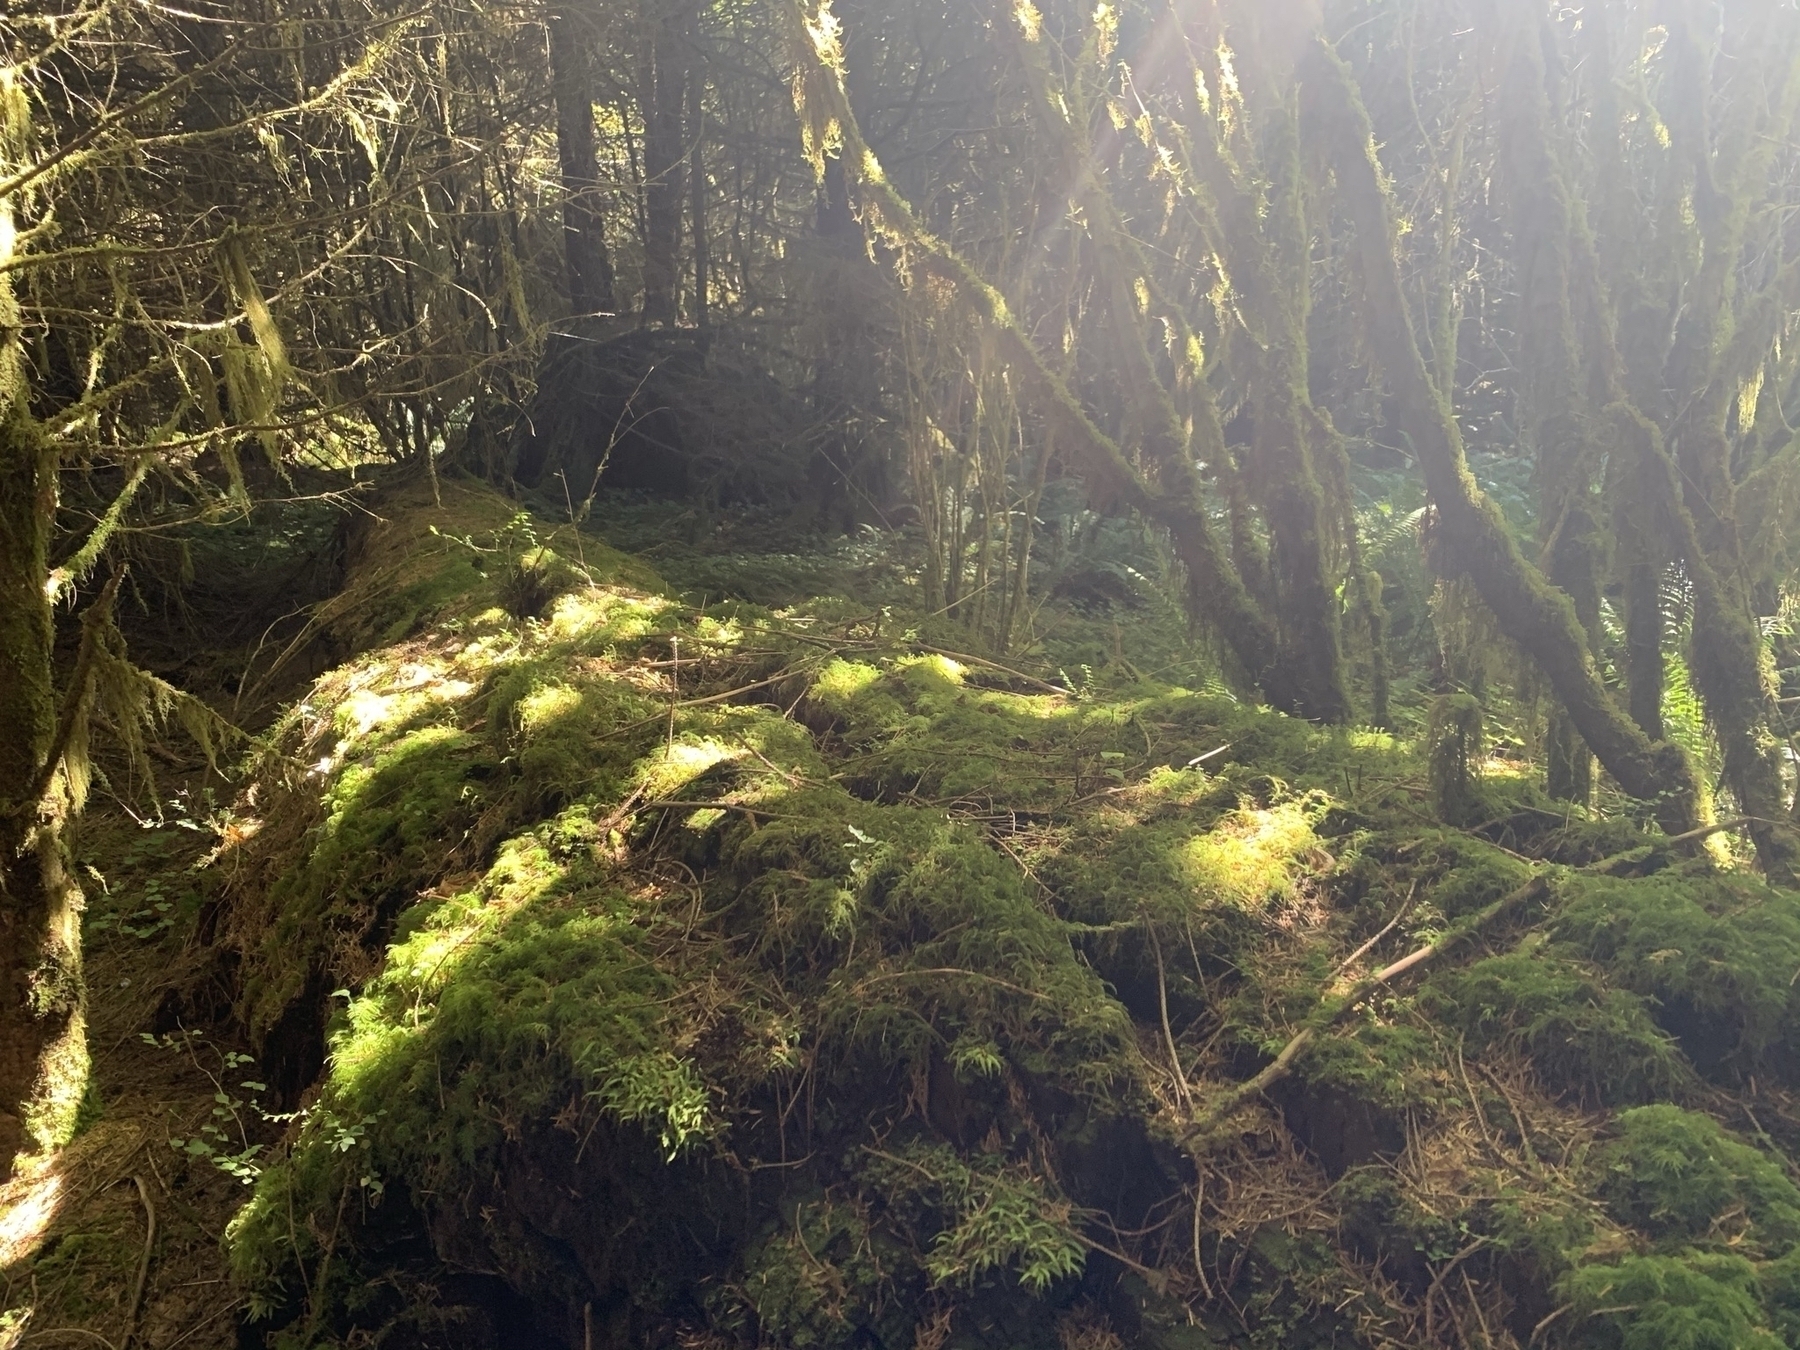 A moss-covered log with sunbeams filtering down through nearby trees